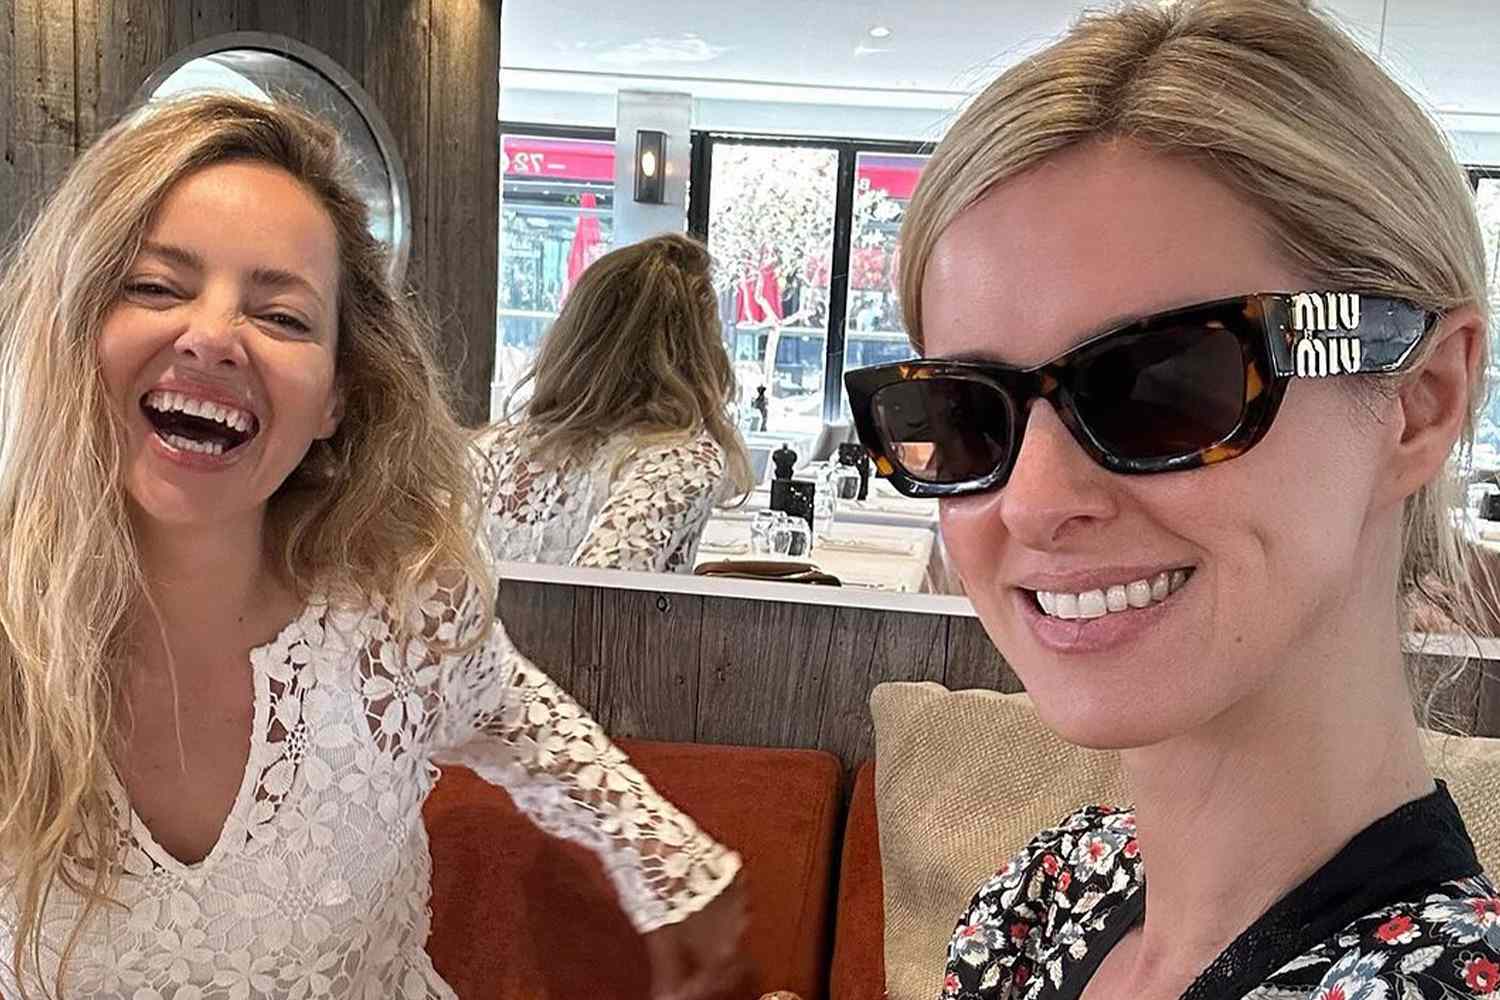 Bijou Phillips Hangs with Famous Friends in France amid Estranged Husband Danny Masterson’s Jail Sentence